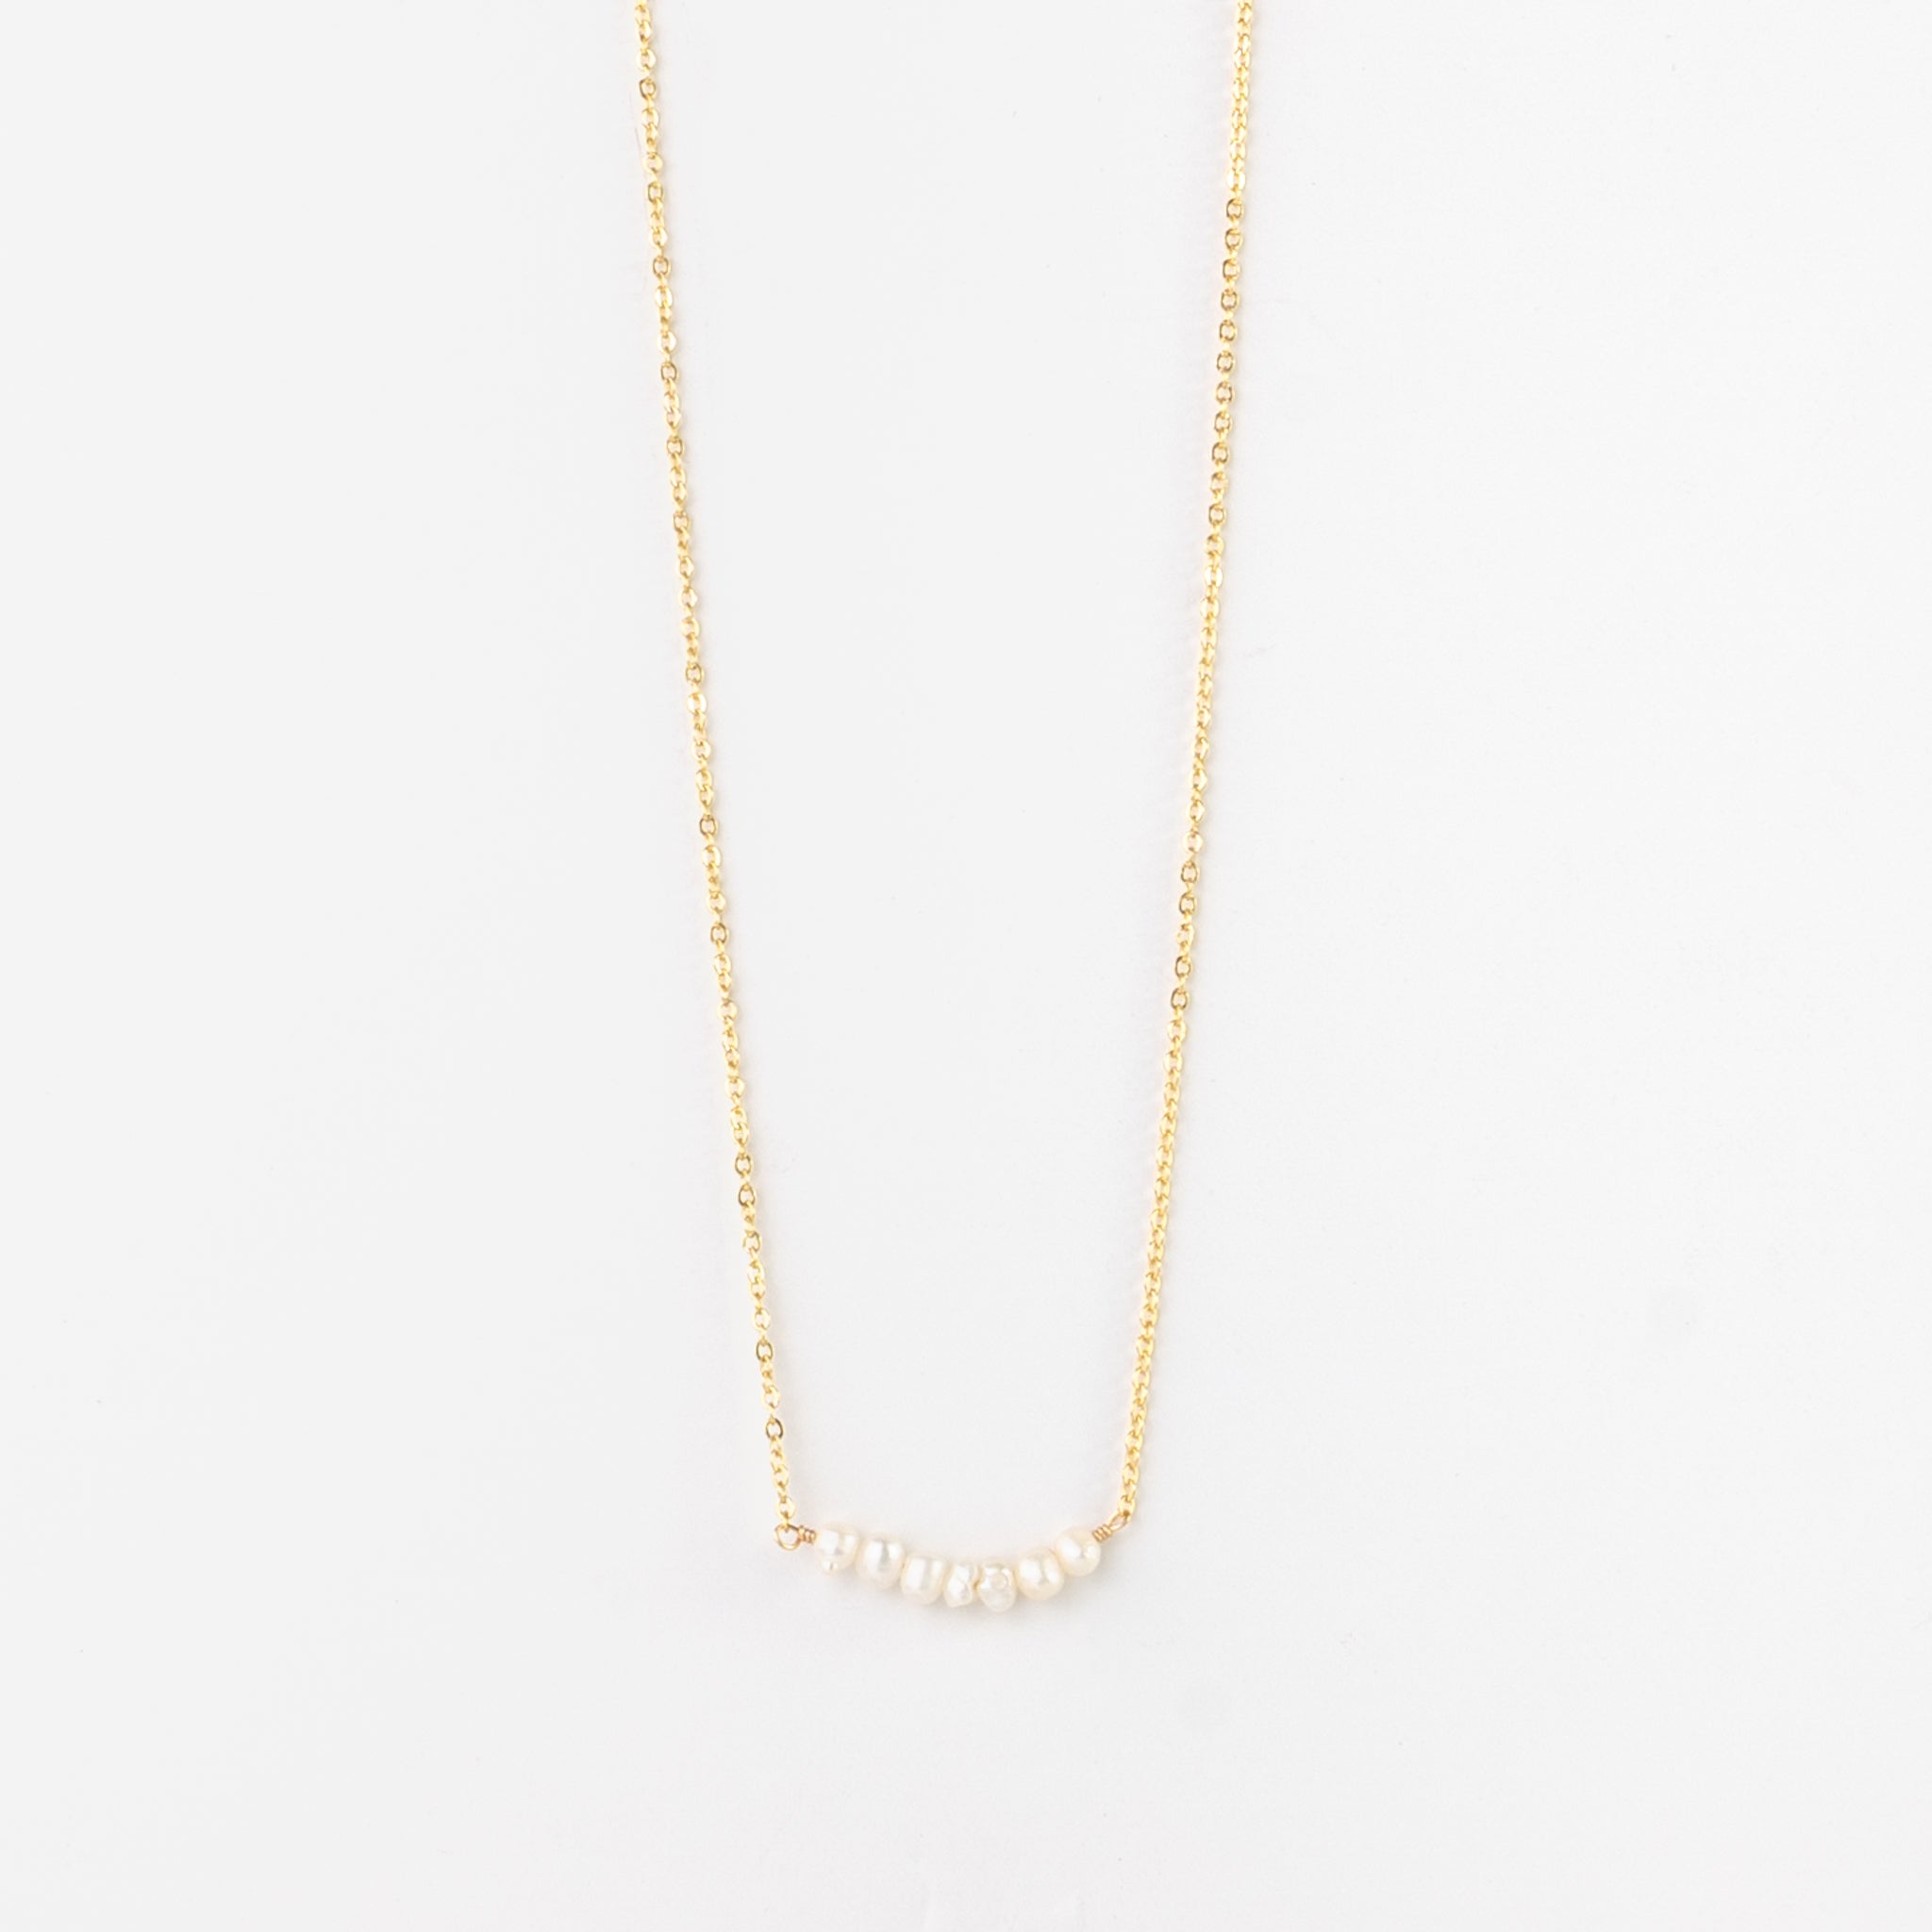 Imperfect Asri Freshwater Pearl Necklace - Pineapple Island